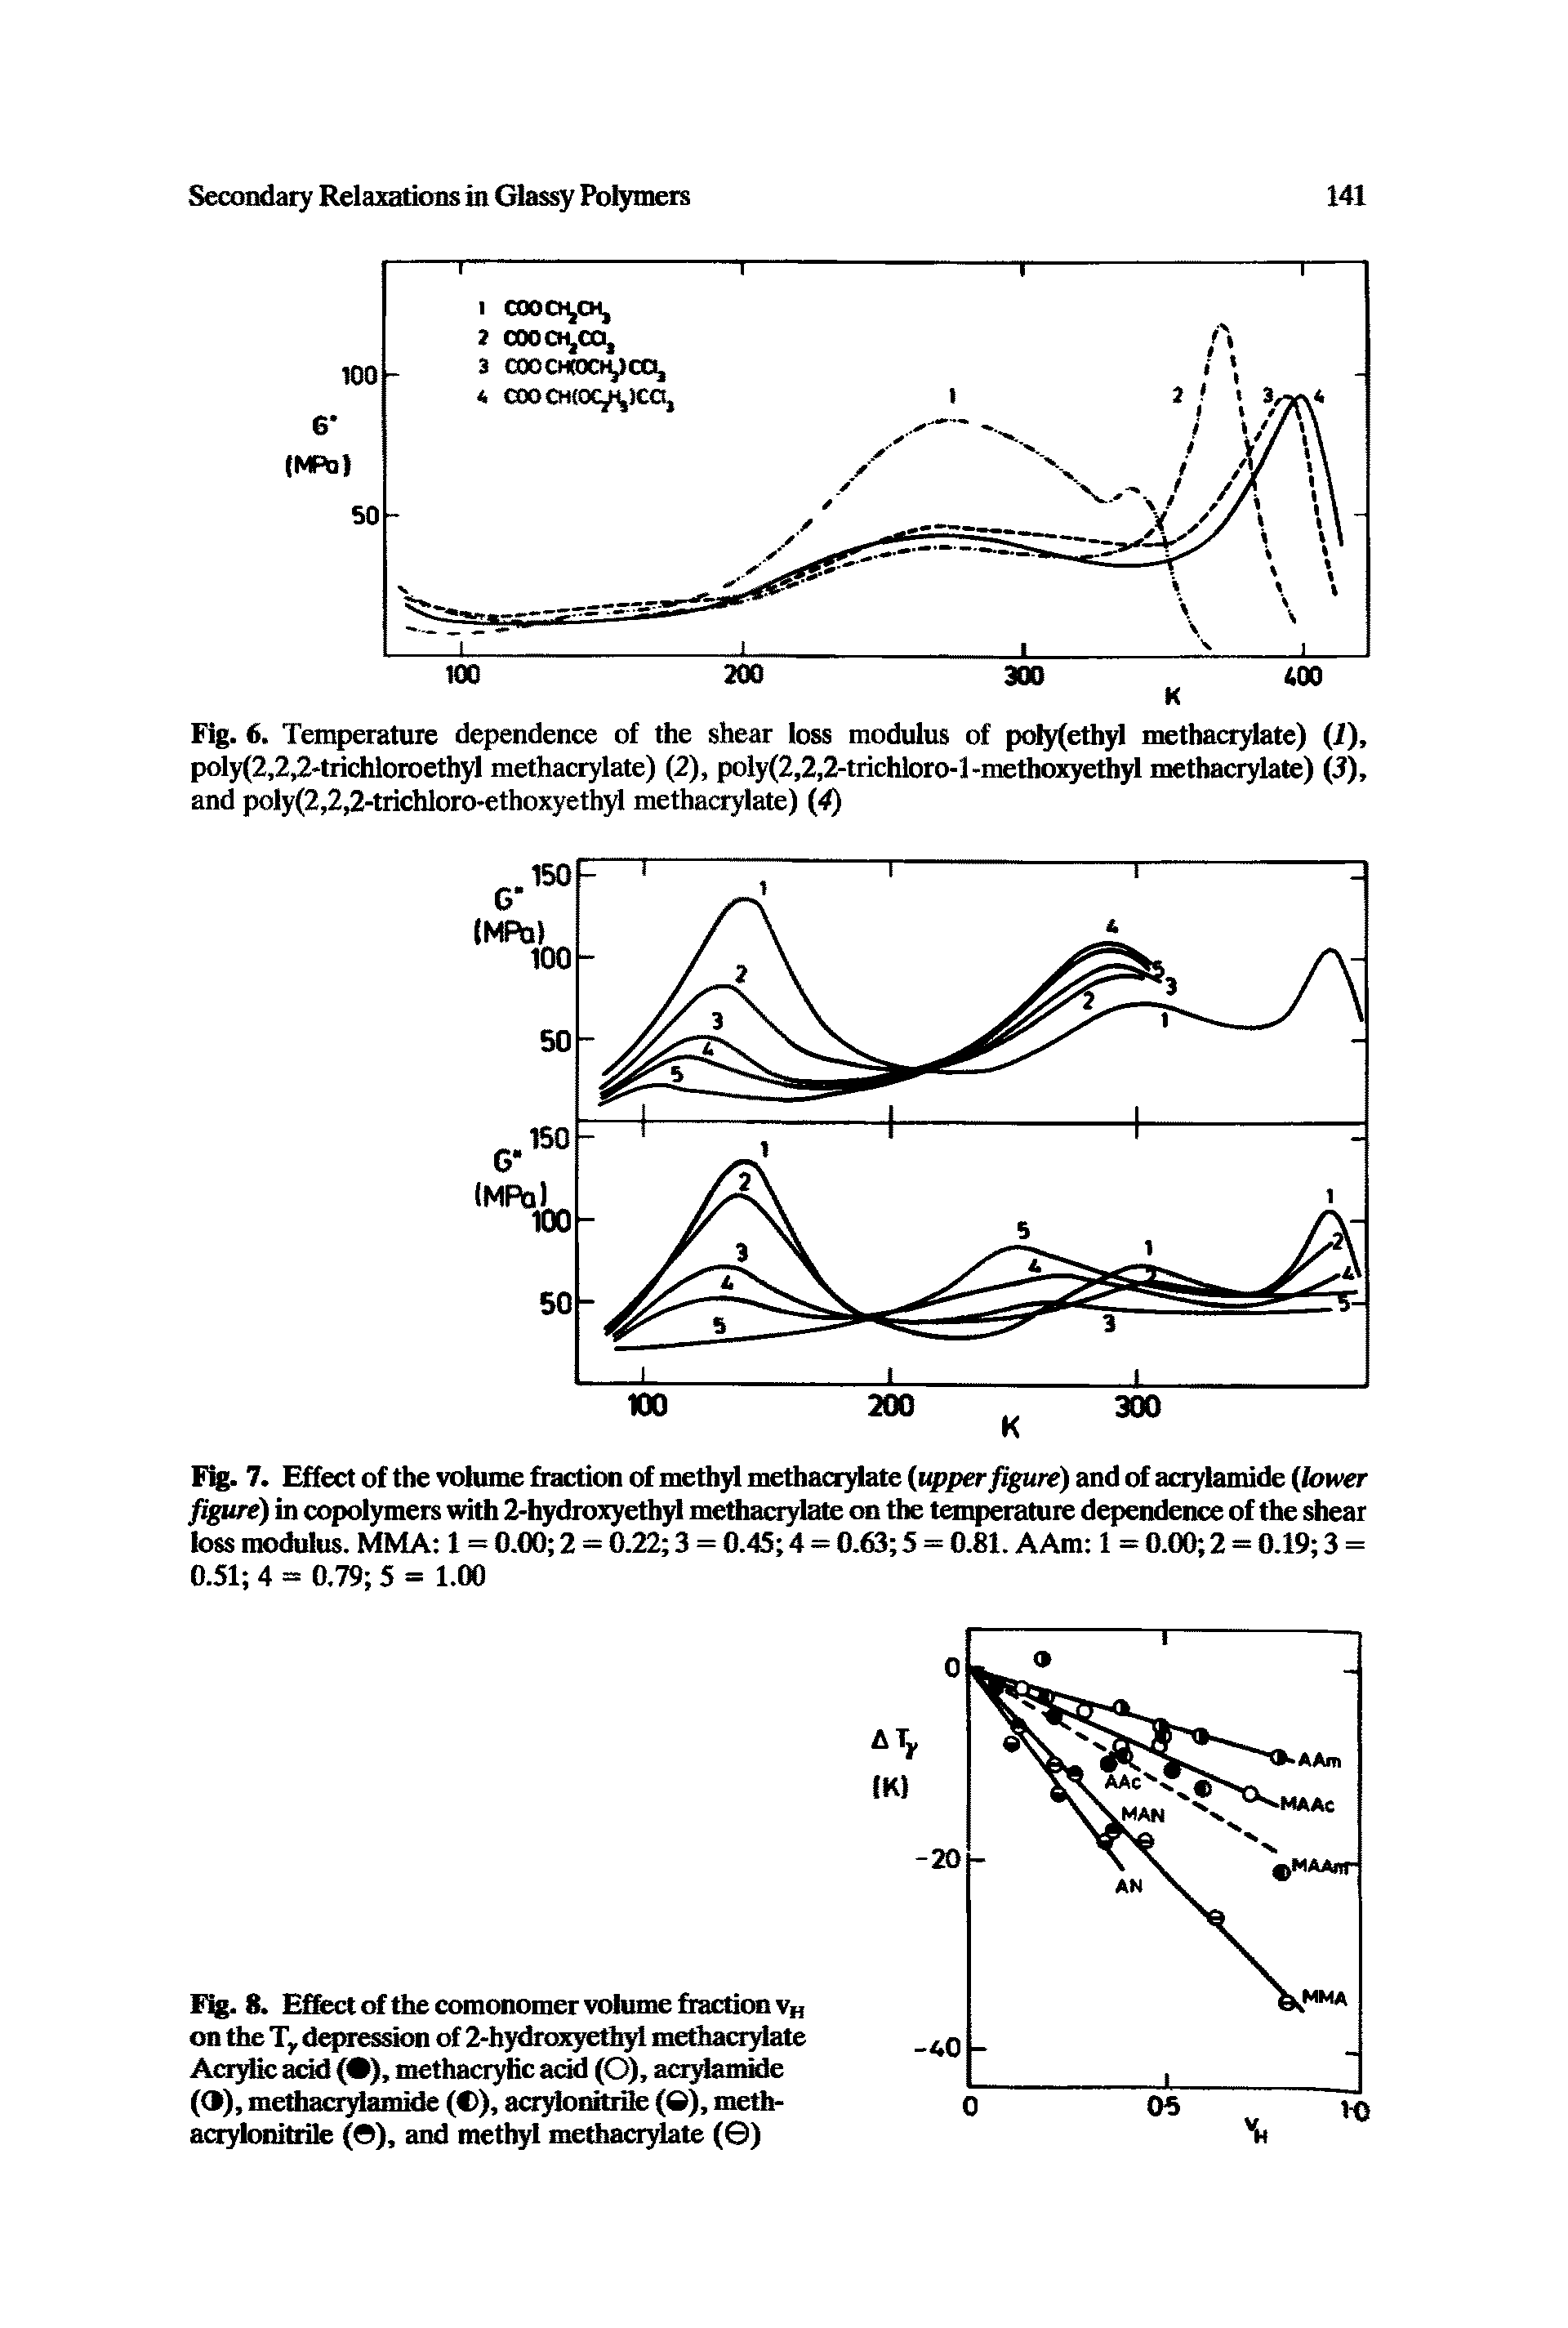 Fig. 6. Temperature dependence of the shear loss modulus of poly(ethyl methacrylate) (1), poly(2,2,2-trichloroethyl methacrylate) (2), poly(2,2,2-trichloro-l-methoxyethyl methacrylate) (3), and poly(2,2,2-trichloro-ethoxyethyl methacrylate) (4)...